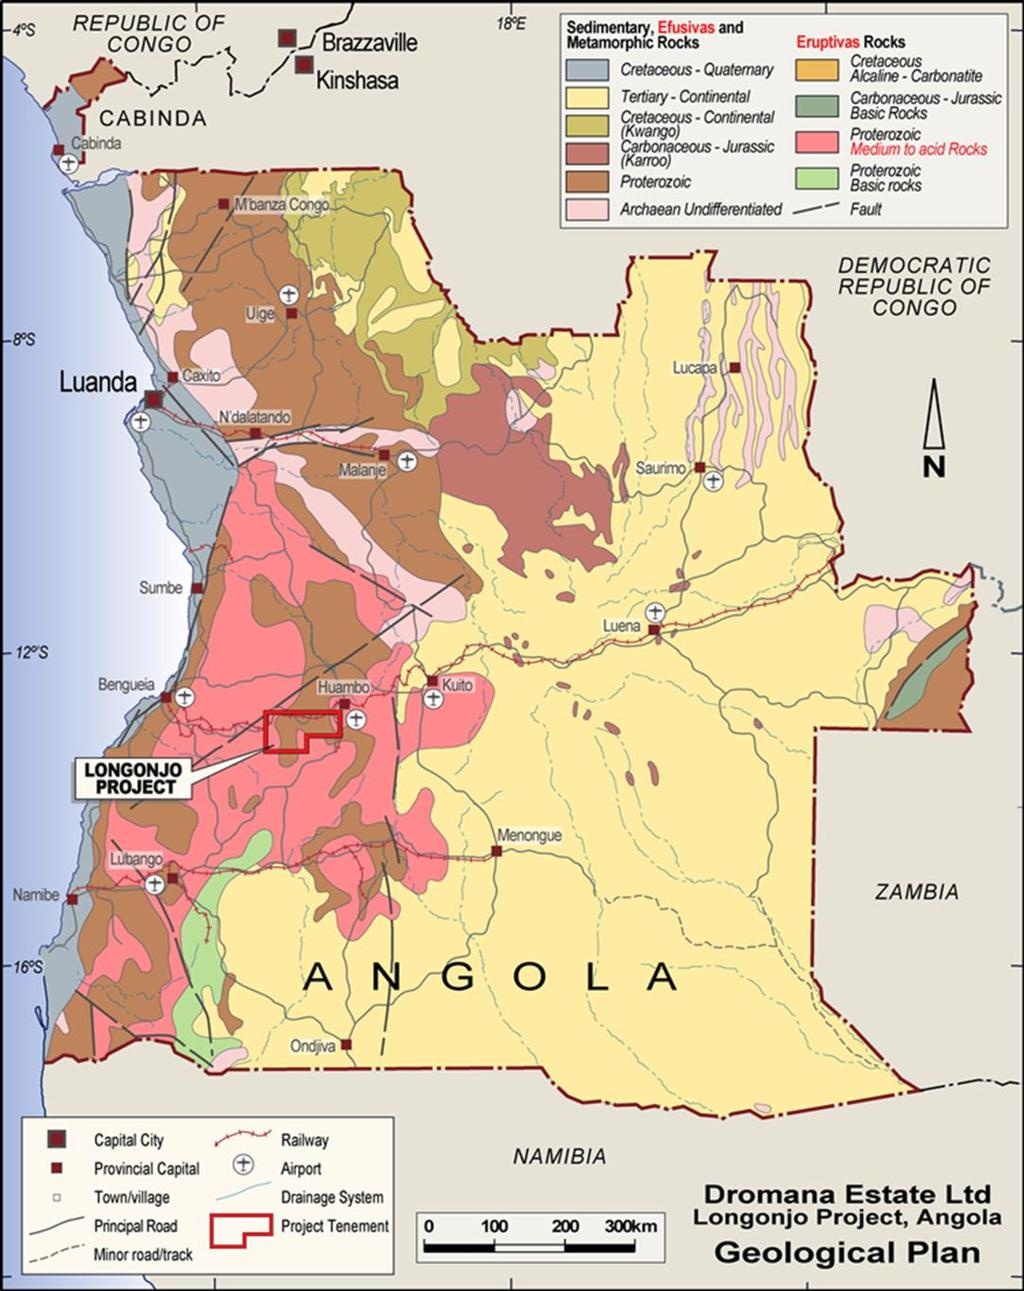 LONGONJO PROJECT: Drmana has an ptin t acquire a 70% interest in the Lngnj Prject thrugh the prpsed acquisitin f Sable Minerals Pty Ltd.